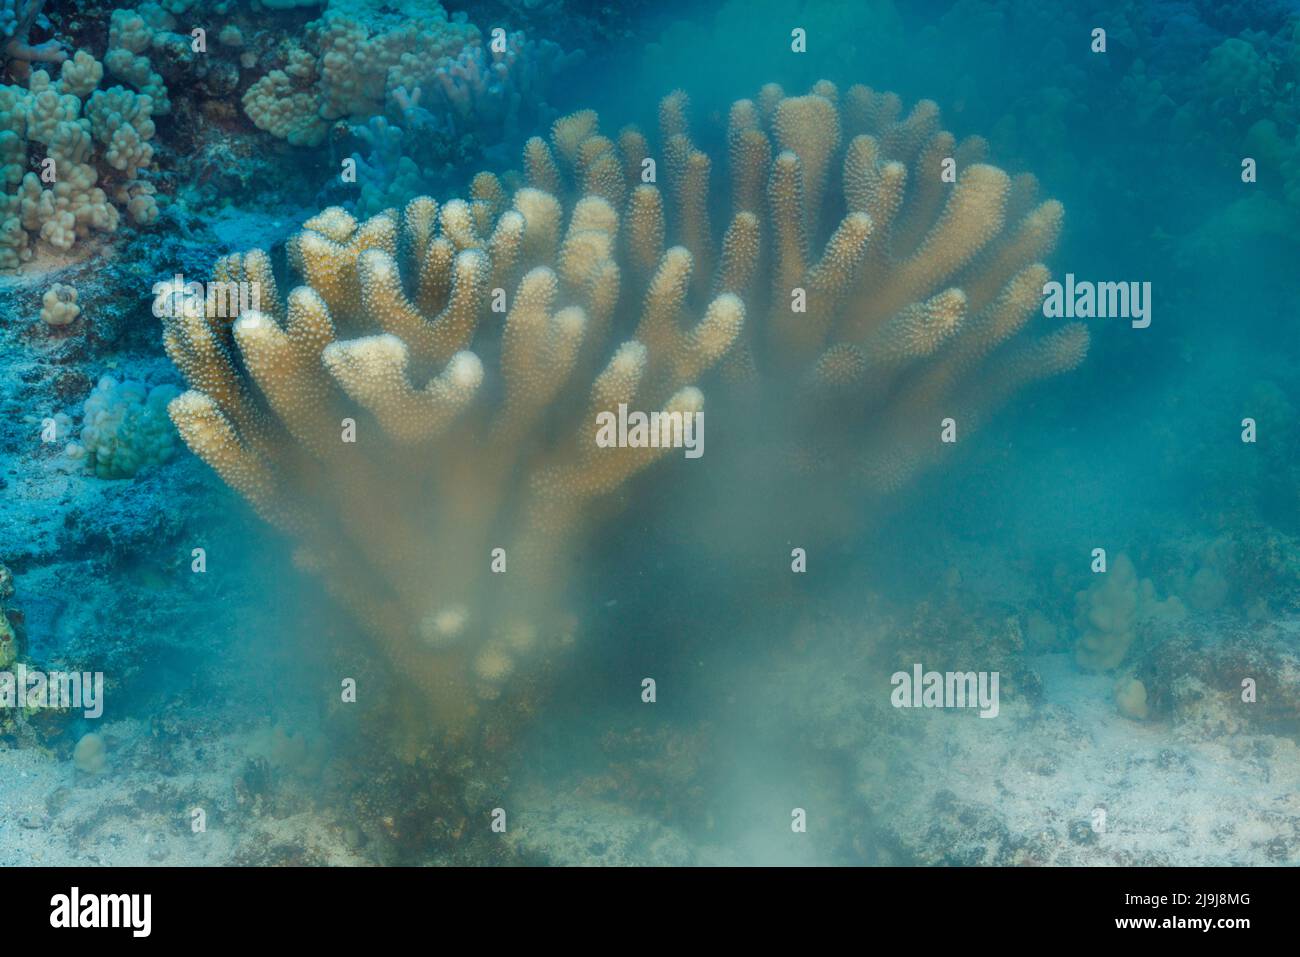 A spawning colony of antler coral, Pocillopora eydouxi, releasing both eggs and sperm into open ocean just after sunrise, Hawaii. Stock Photo